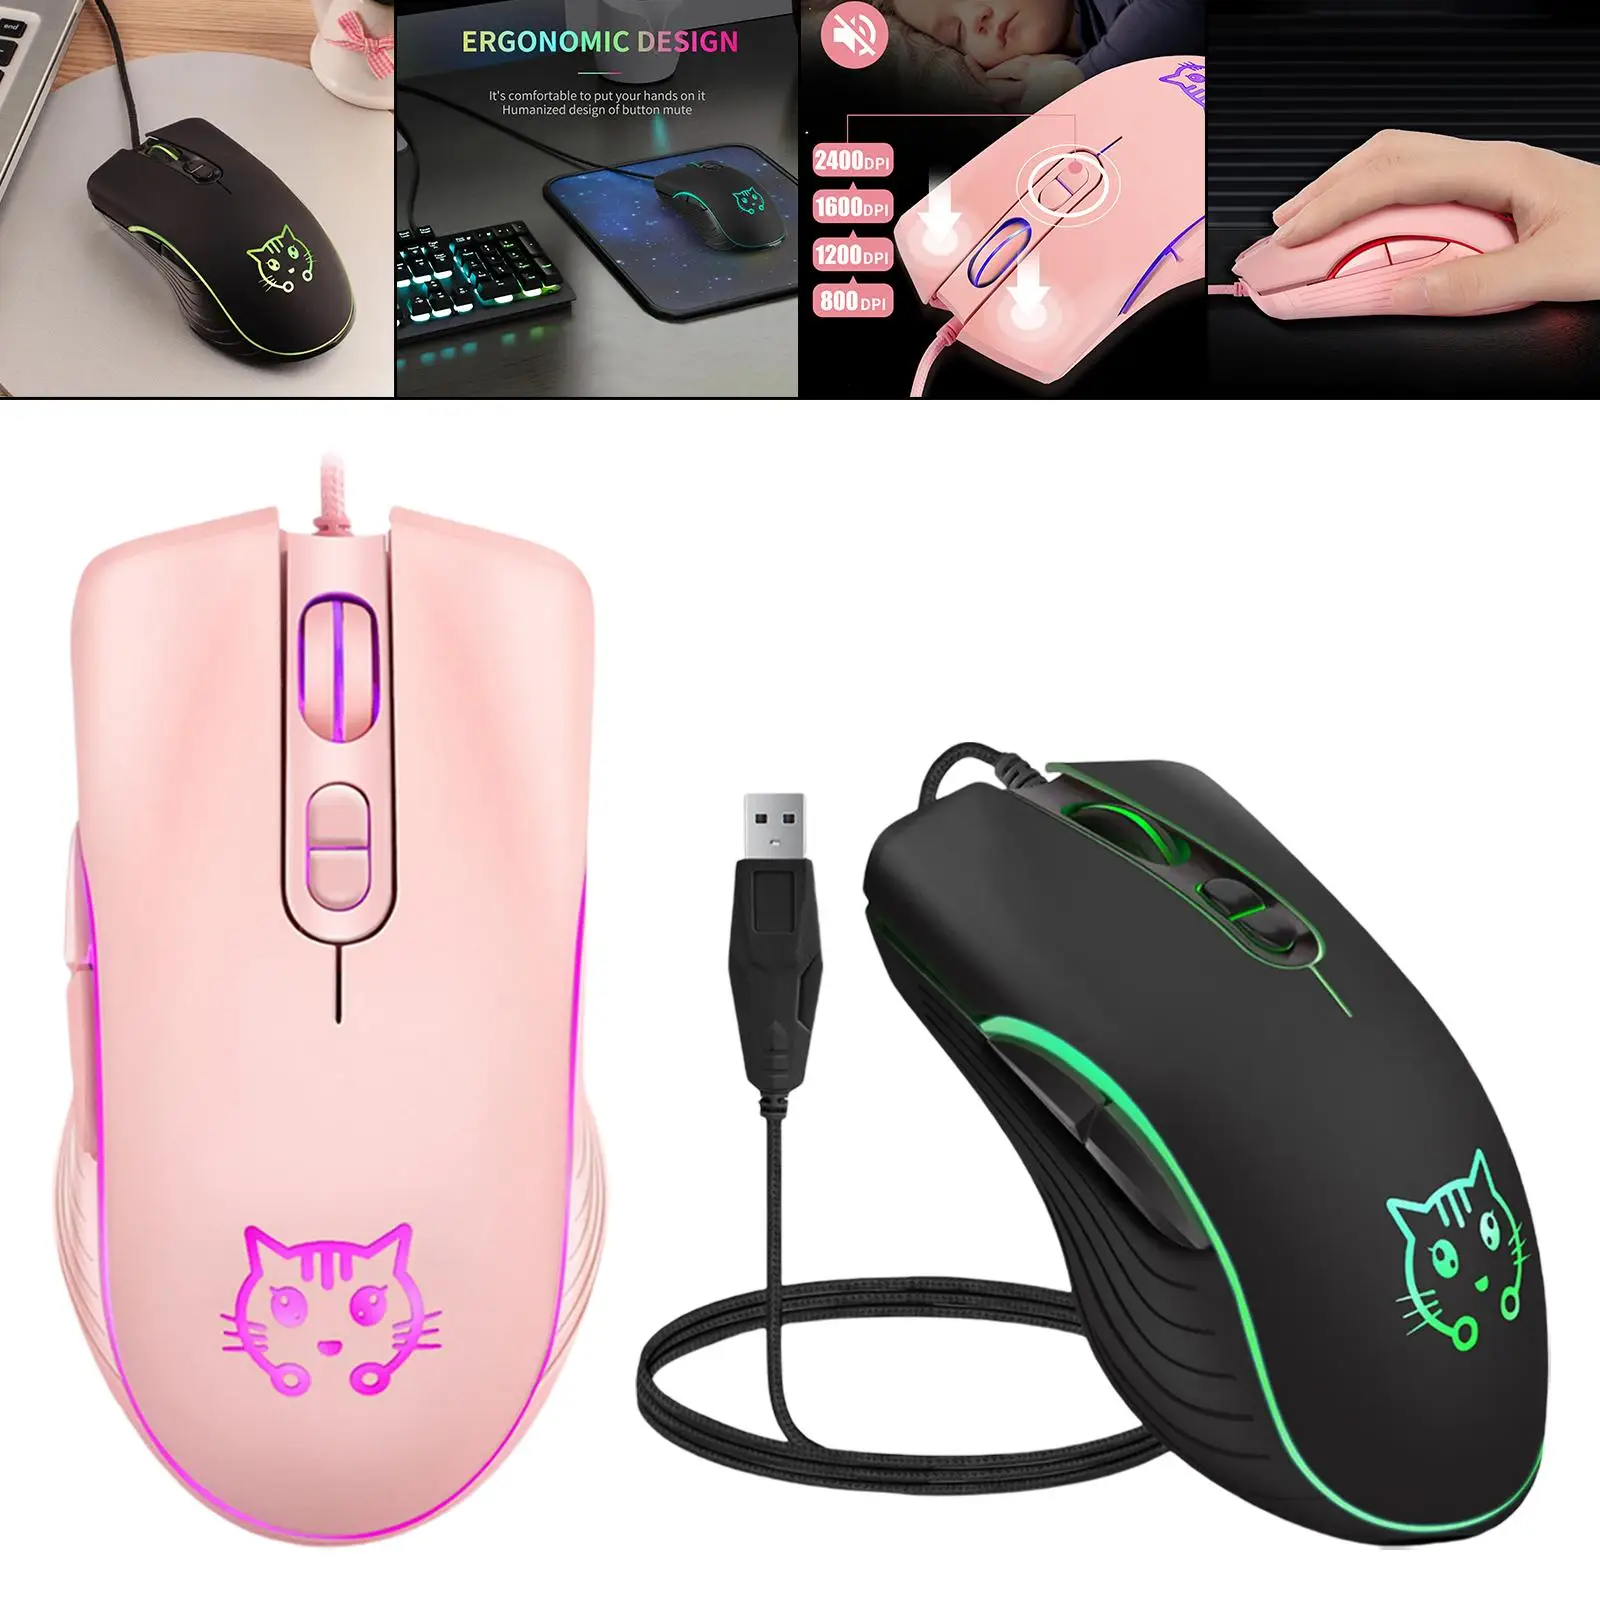 Cute  USB Gaming Mouse, RGB Breathing Lights, Mute Anti- Ergonomic Optical Mice, for  Desktop 4 Adjustable DPI up to 2400